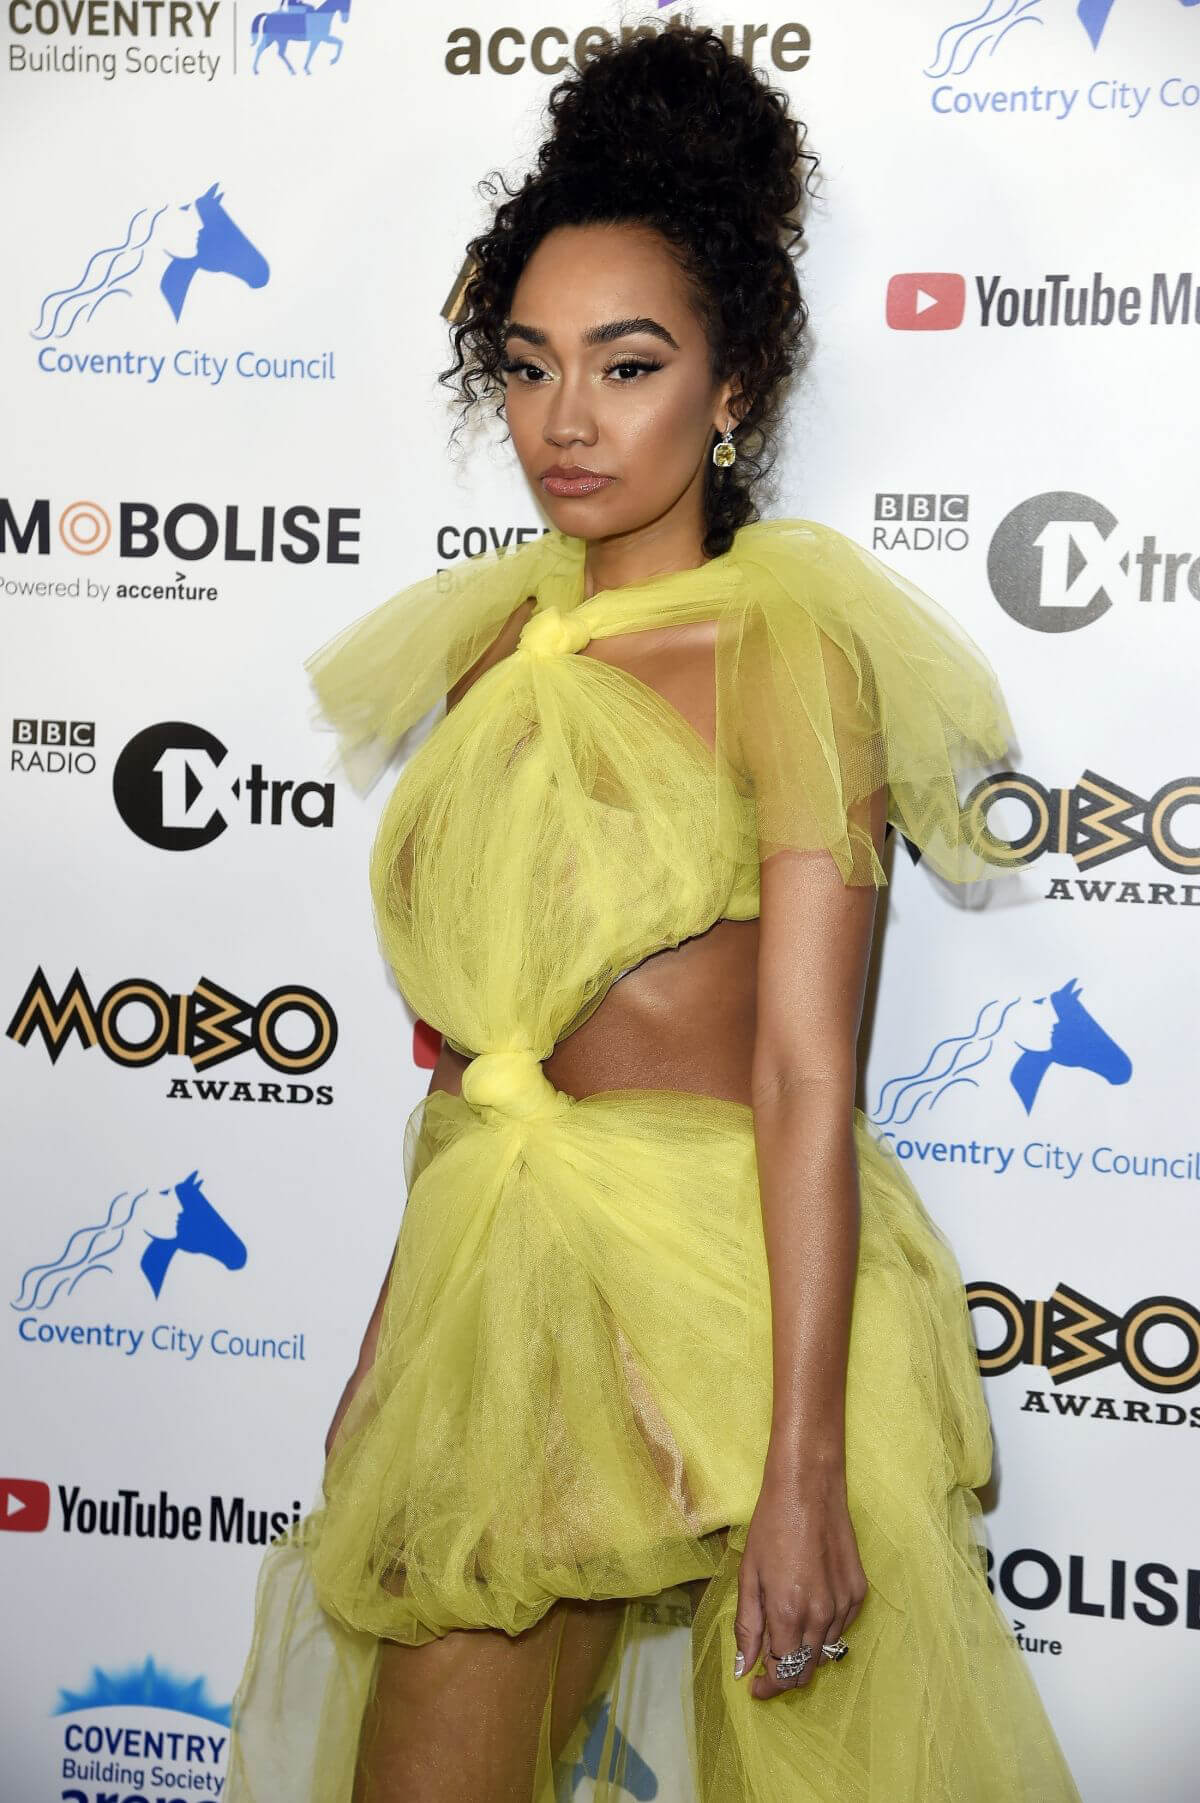 Leigh-Anne Pinnock attends Mobo Awards 2021 in Coventry